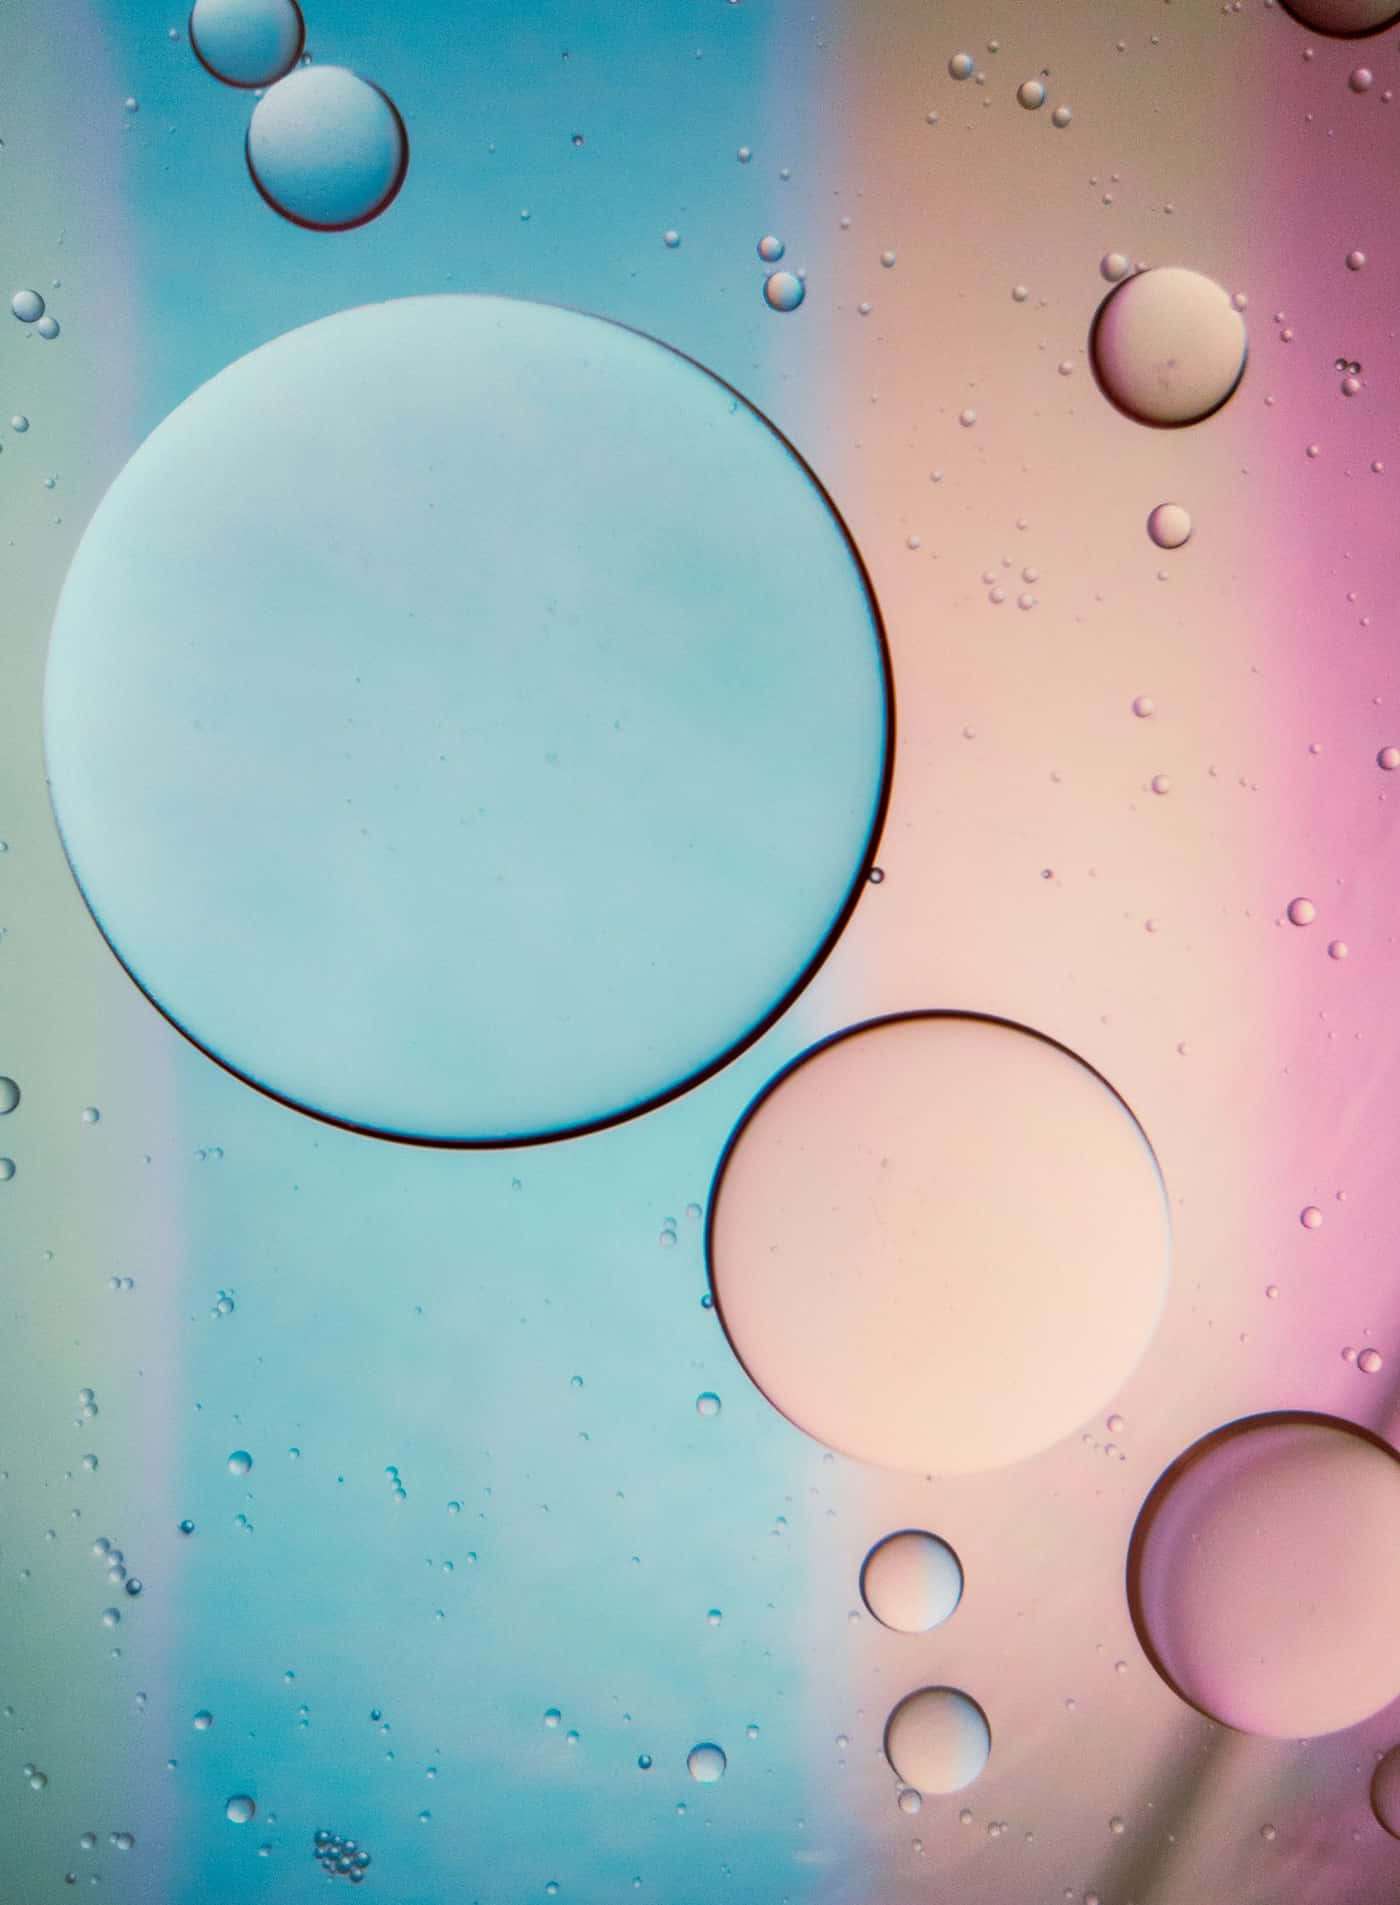 A Close Up Of Colorful Water Bubbles On A Glass Wallpaper